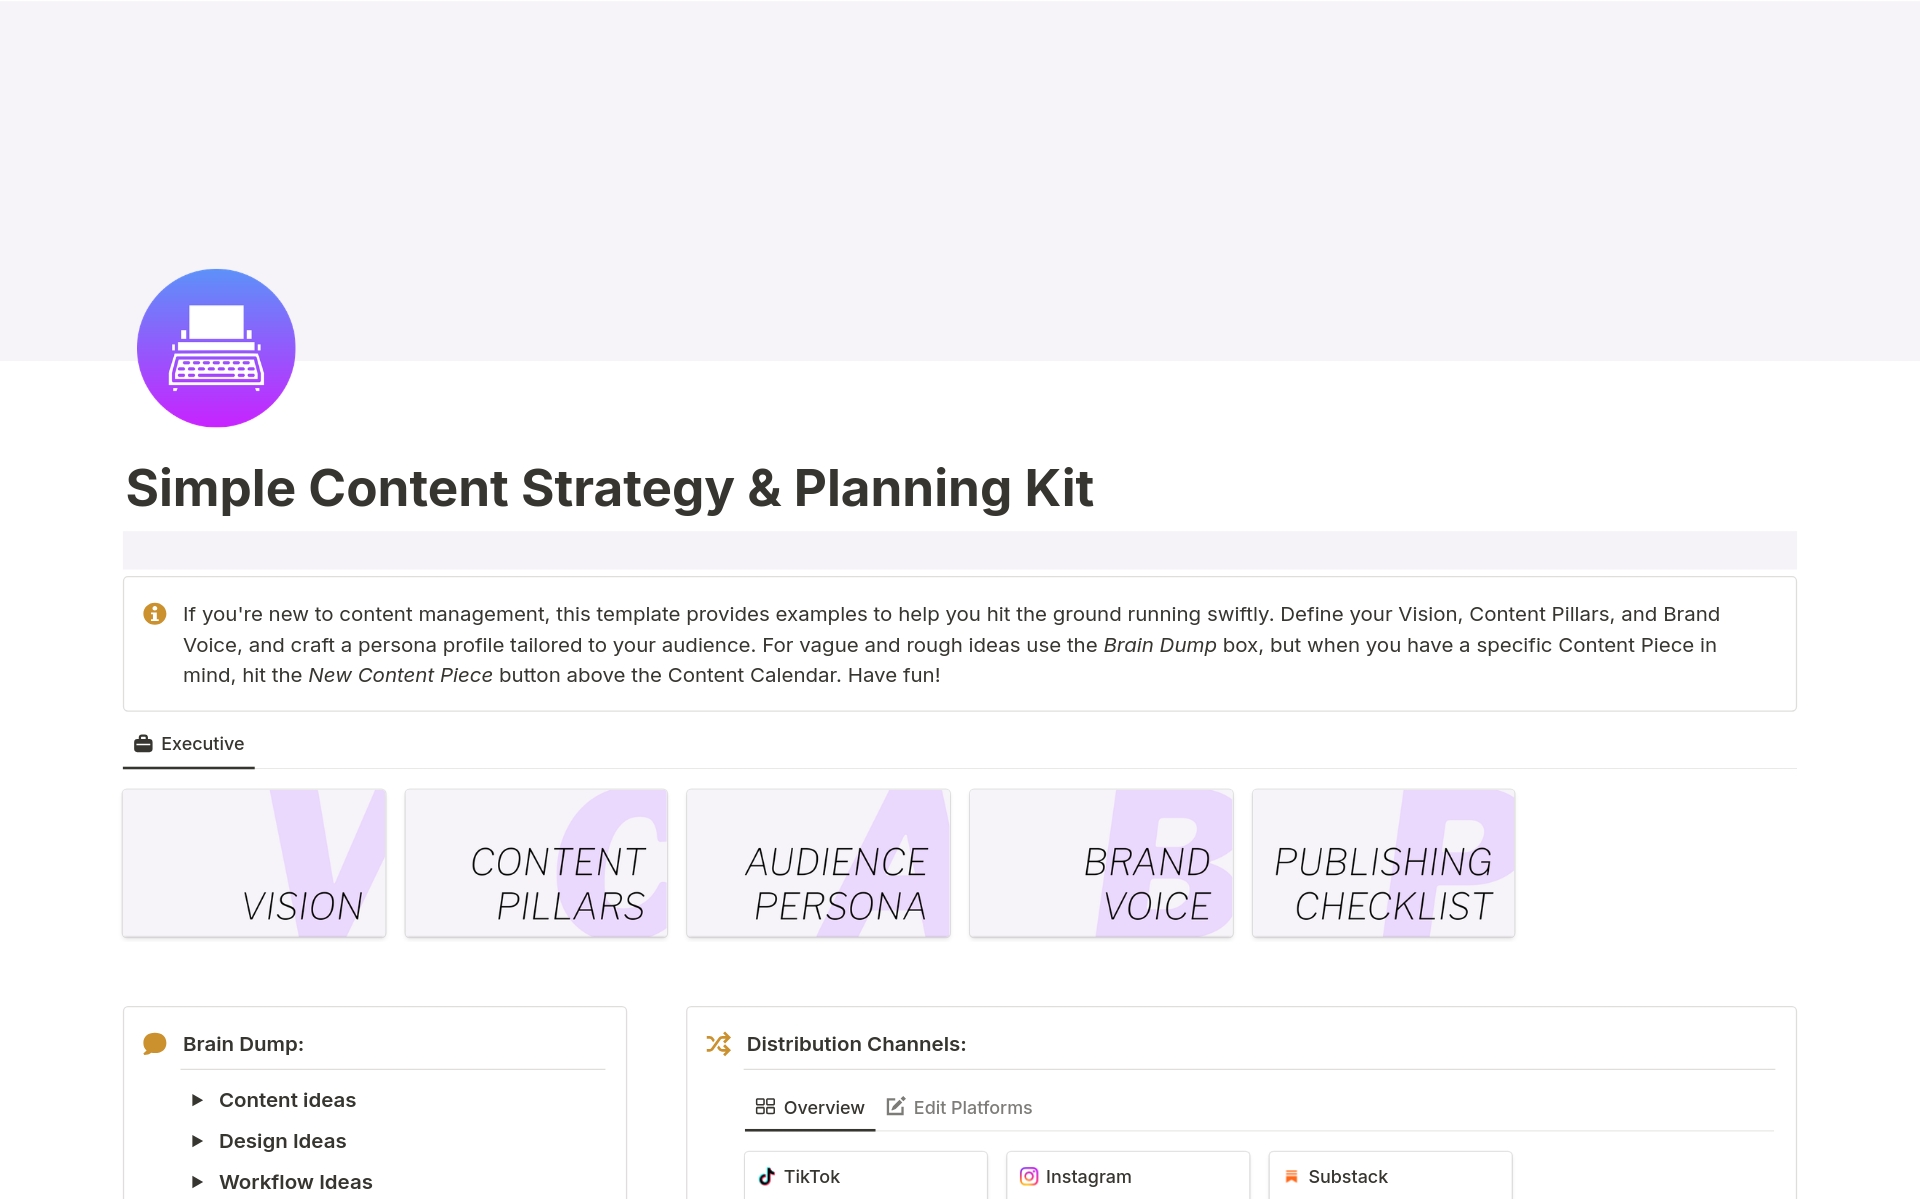 This template is ideal for you if you seek to develop and implement a content strategy, effectively organize and streamline your processes, and desire all essential information in one accessible location. Suitable for new and experienced Creators